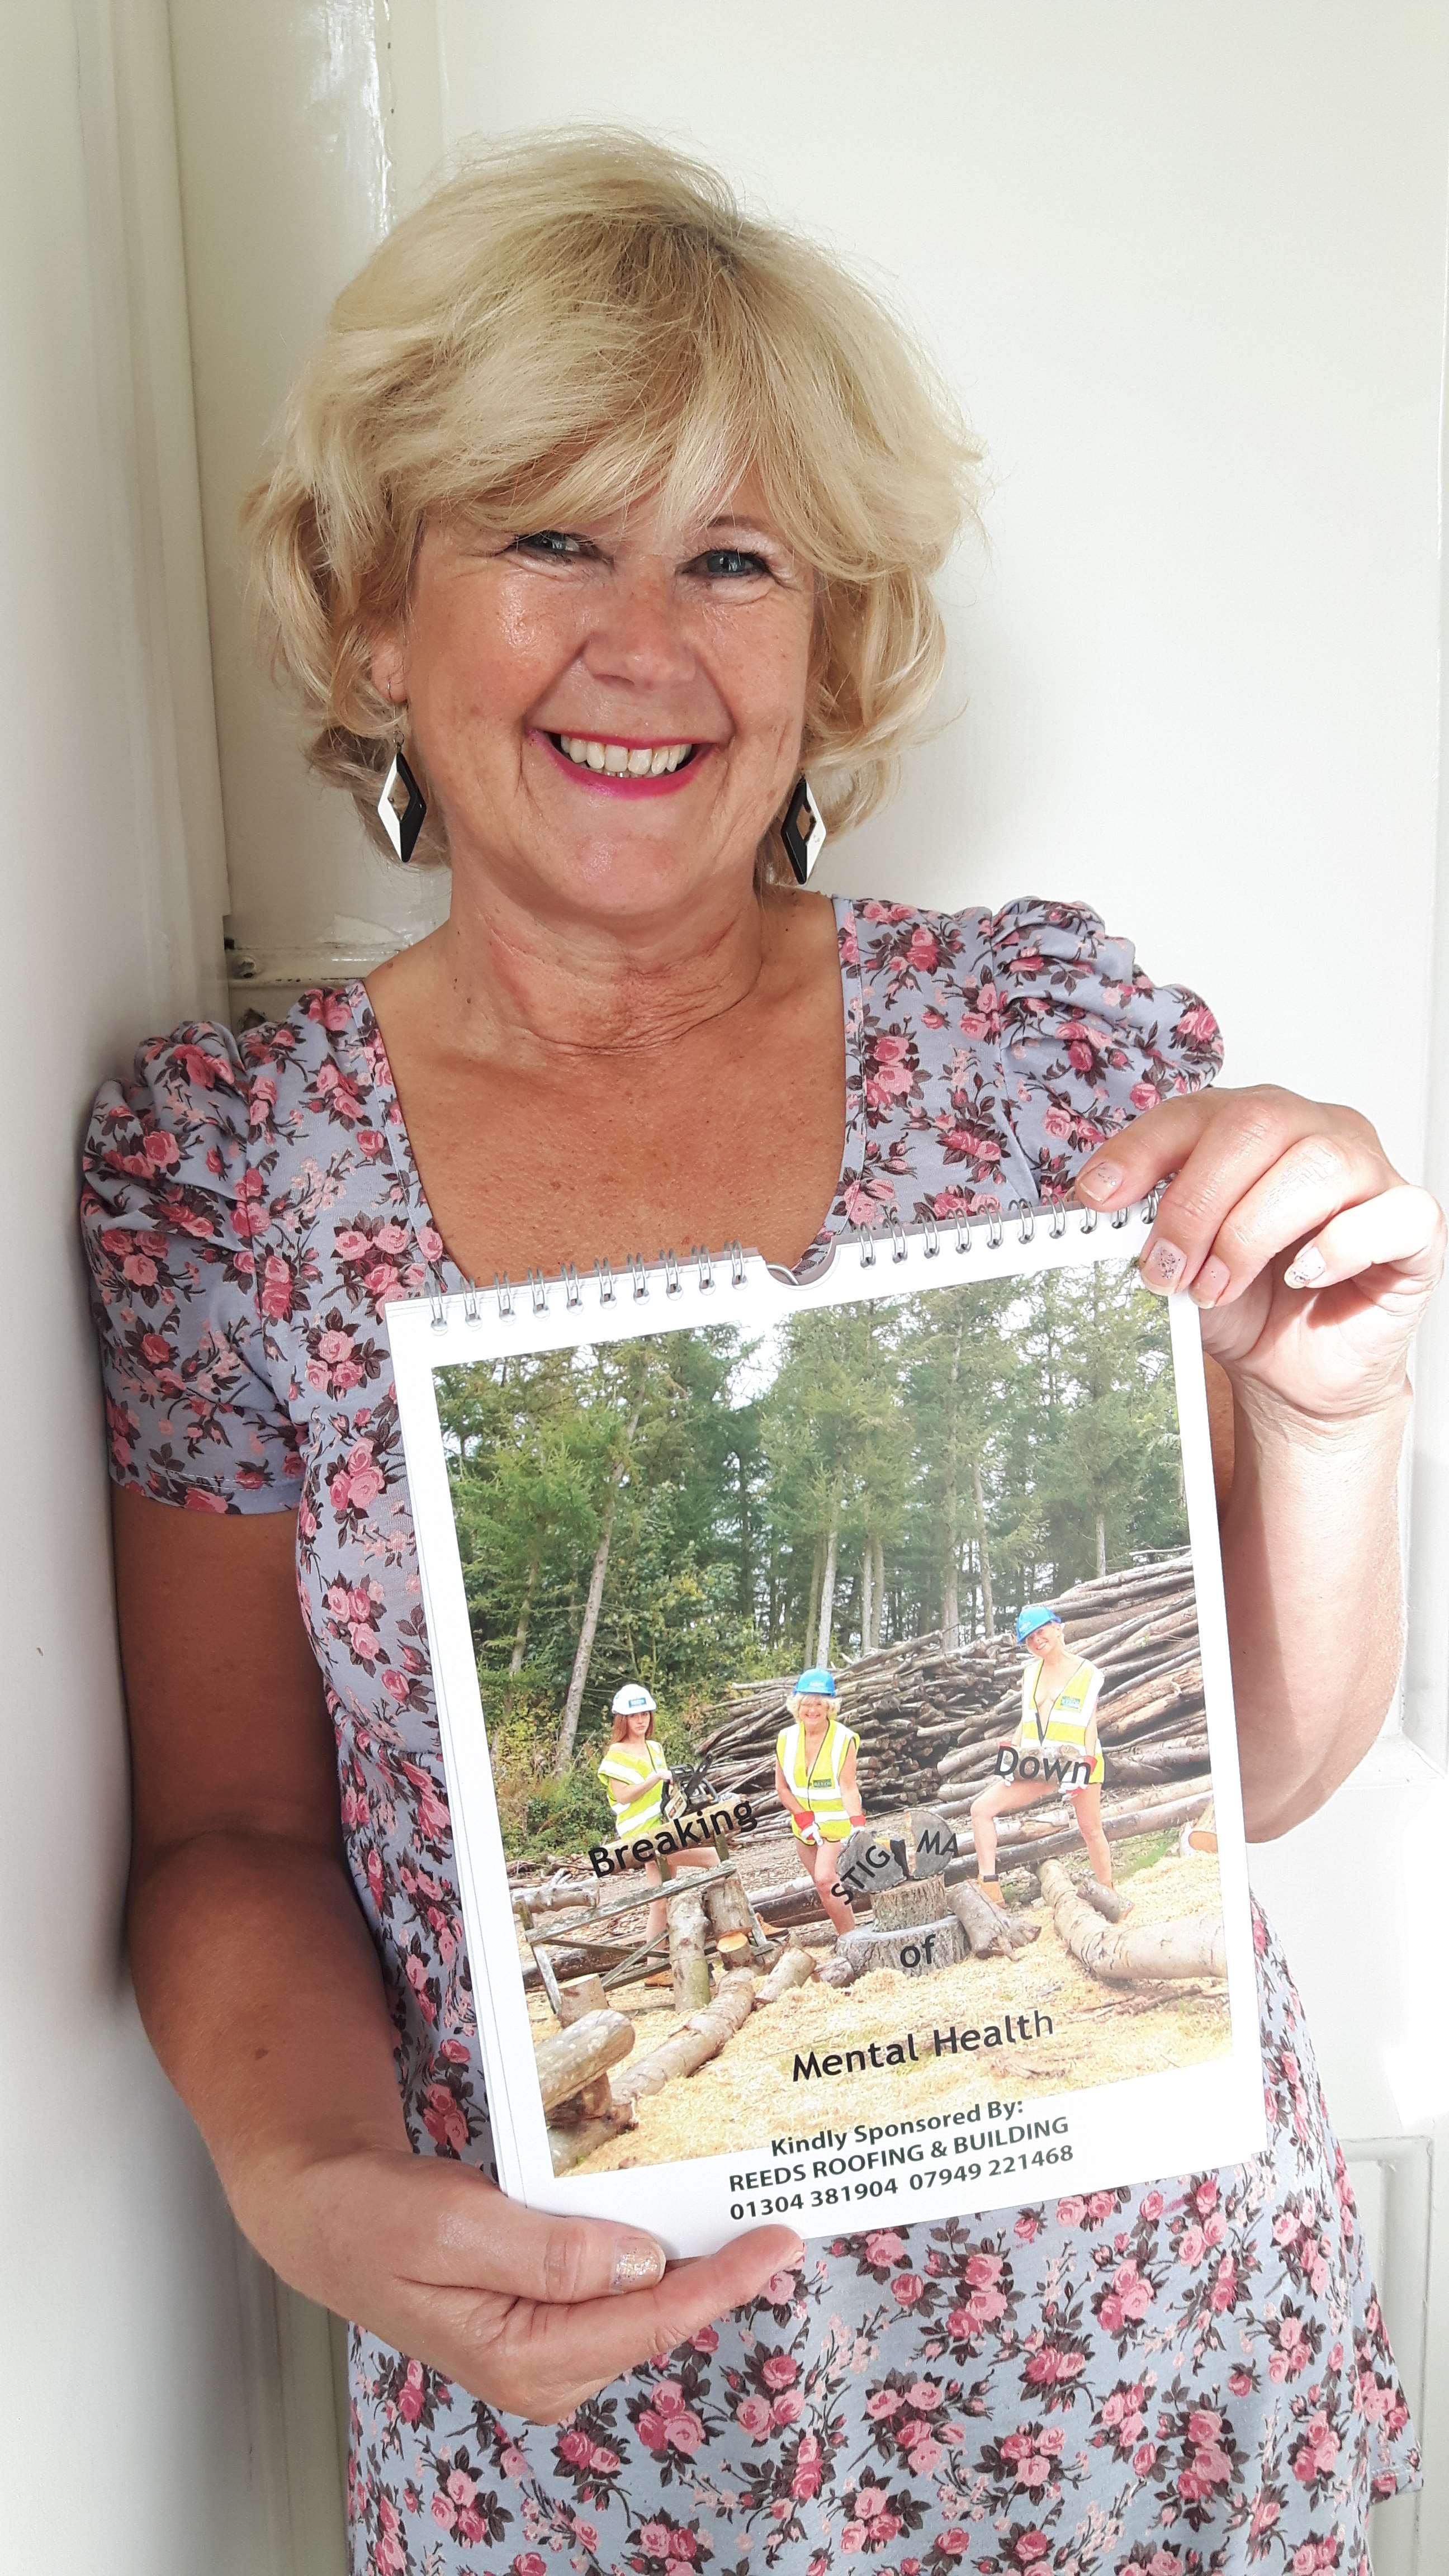 The calendar which aims to break the stigma surrounding mental health will be unveiled by Tracy Carr, pictured, tonight